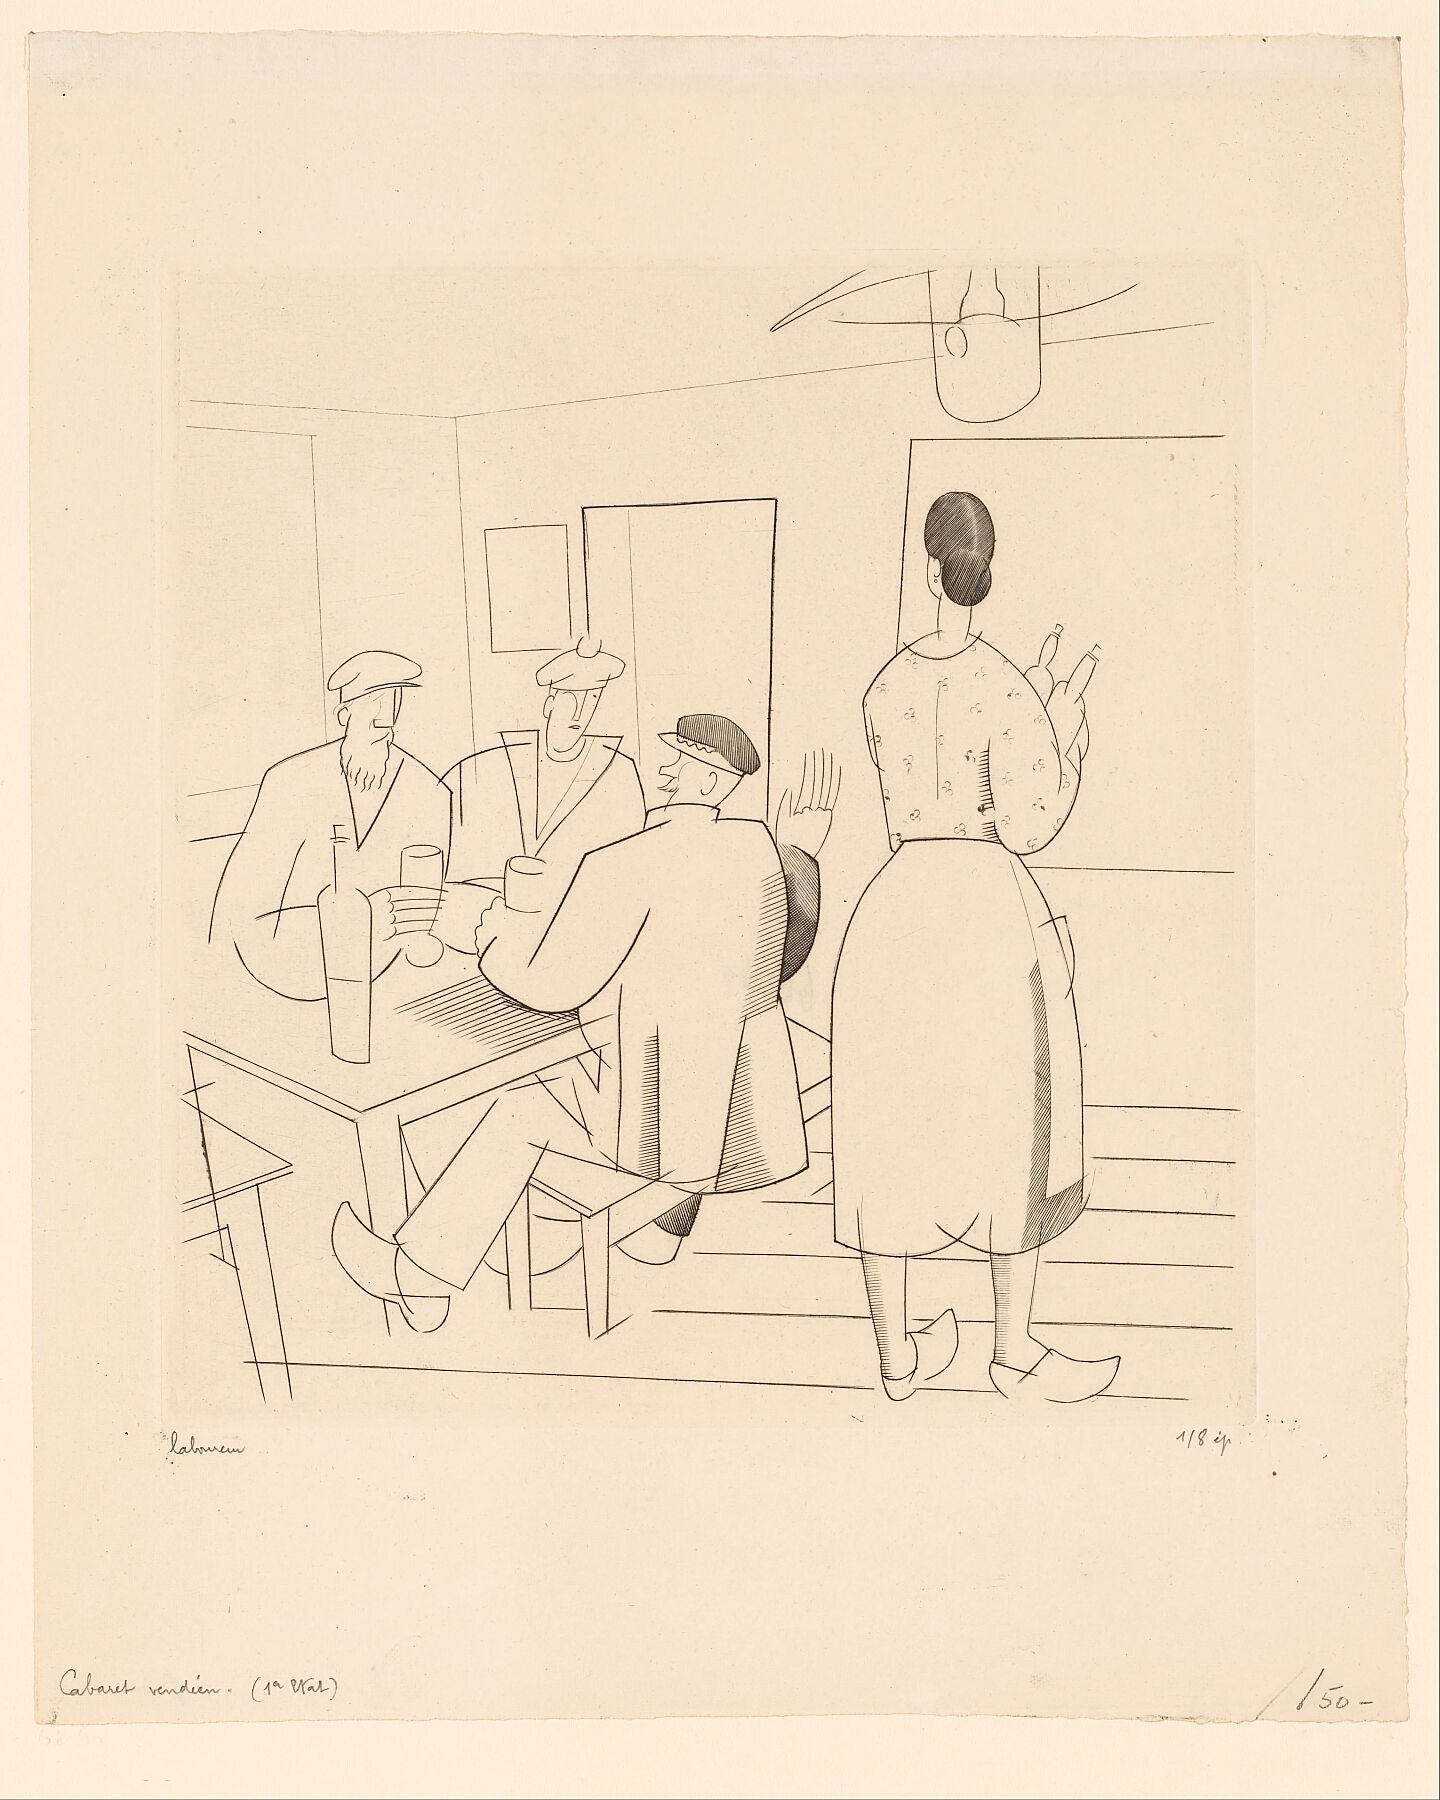 Cafe interior with customers and waitress, Jean Emile Laboureur, 1925